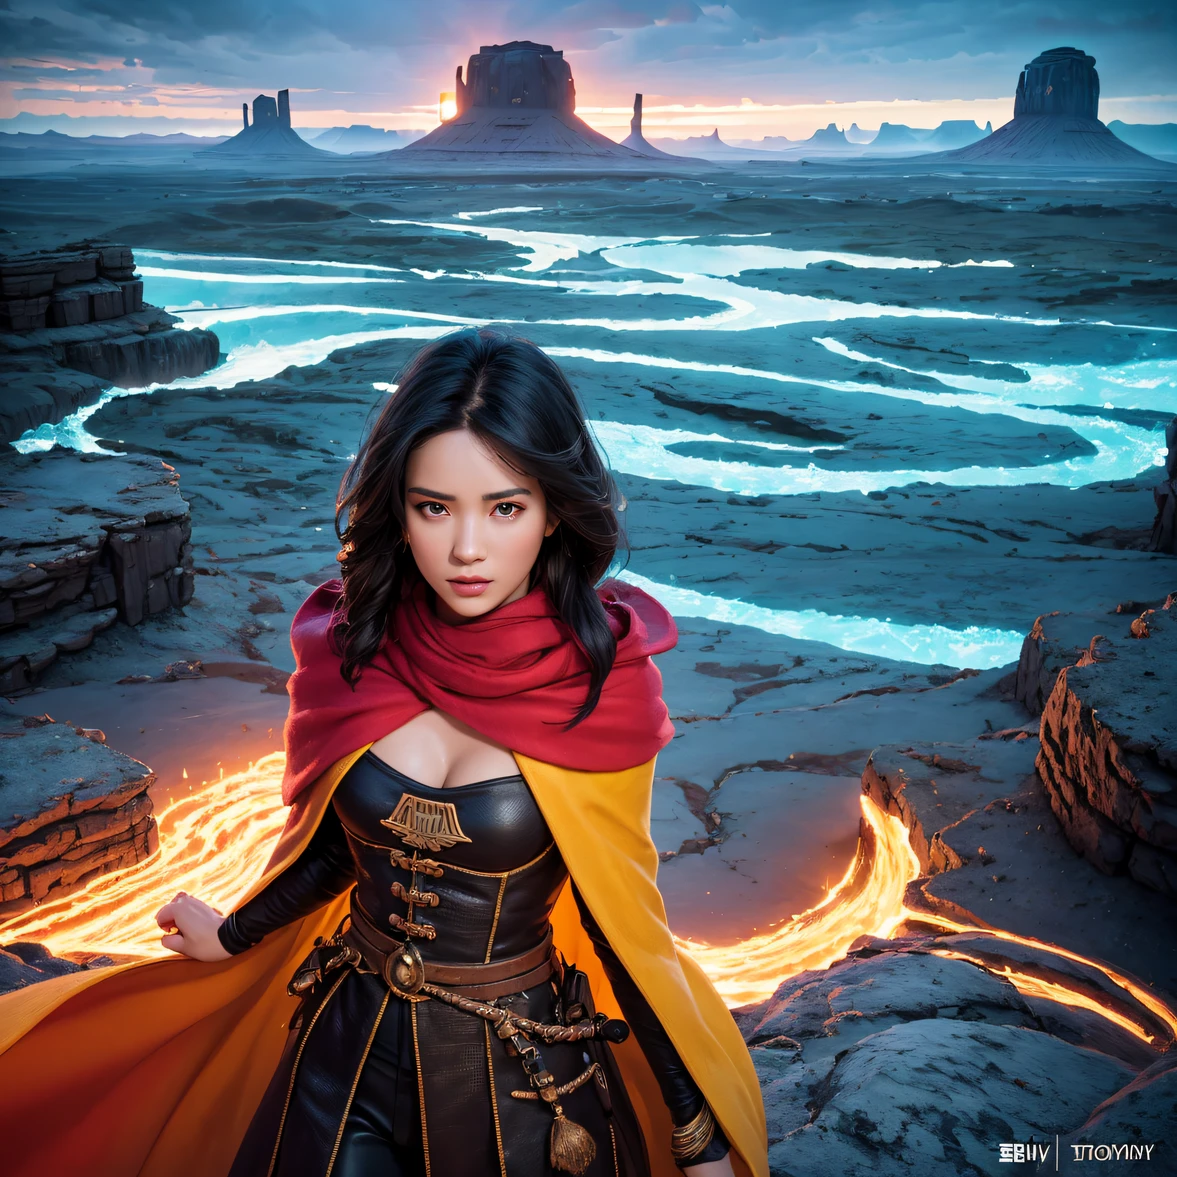 Labyrinth 32K,Realistic painting_book_cover:1.3,  1:60 miniatures，Go to the maze，CG Giant, Smooth CG art, Realistic. Cheng Yi, Forced masterpiece，monument valley，Geometry Cute secret rendering, Rendu portrait 8k, Render character art 8 K, Kawaii realistic portrait， tmasterpiece，monument valley，geomerty（Linen batik scarf）， Angry fighting stance， looking at the ground， Batik linen bandana， Chinese python pattern long-sleeved garment，Uncharted（Abstract propylene splash：1.2）， Dark clouds lightning background，tmasterpiece，Monument Valley geometry（realisticlying：1.4），tmasterpiece，monument valley，geomerty，Telephoto lens high， A high resolution， the detail， RAW photogr， Sharp Re， Nikon D850 Film Stock Photo by Jefferies Lee 4 Kodak Portra 400 Camera F1.6 shots, Rich colors, ultra-realistic vivid textures, Dramatic lighting，8K quality, Girls，Backstreets， Dark clouds lightning background masterpiece，monument valley，geomerty（realisticlying：1.4），Black color hair，tmasterpiece，monument valley，Geometric secrets， RAW photogr， Sharp Re， Nikon D850 Film Stock Photo by Jefferies Lee 4 Kodak Portra 400 Camera F1.6 shots, Rich colors, ultra-realistic vivid textures, Drama light film CG agency，Tropical canyon battle scene、Chinese big breasts、Vintage trench coat、three kingdom、ember、100 people、Faraway view、intense battles、high detal、masuter piece、NSFW，Multi-layered long-sleeved gauze garment，Quick-drying vest，Colorful cotton and linen sweater，Red and black snake cloak cloak，Doomsday ruins（Uncharted）Climb the streets（（（Miniatures）））tmasterpiece，monument valley，geomerty